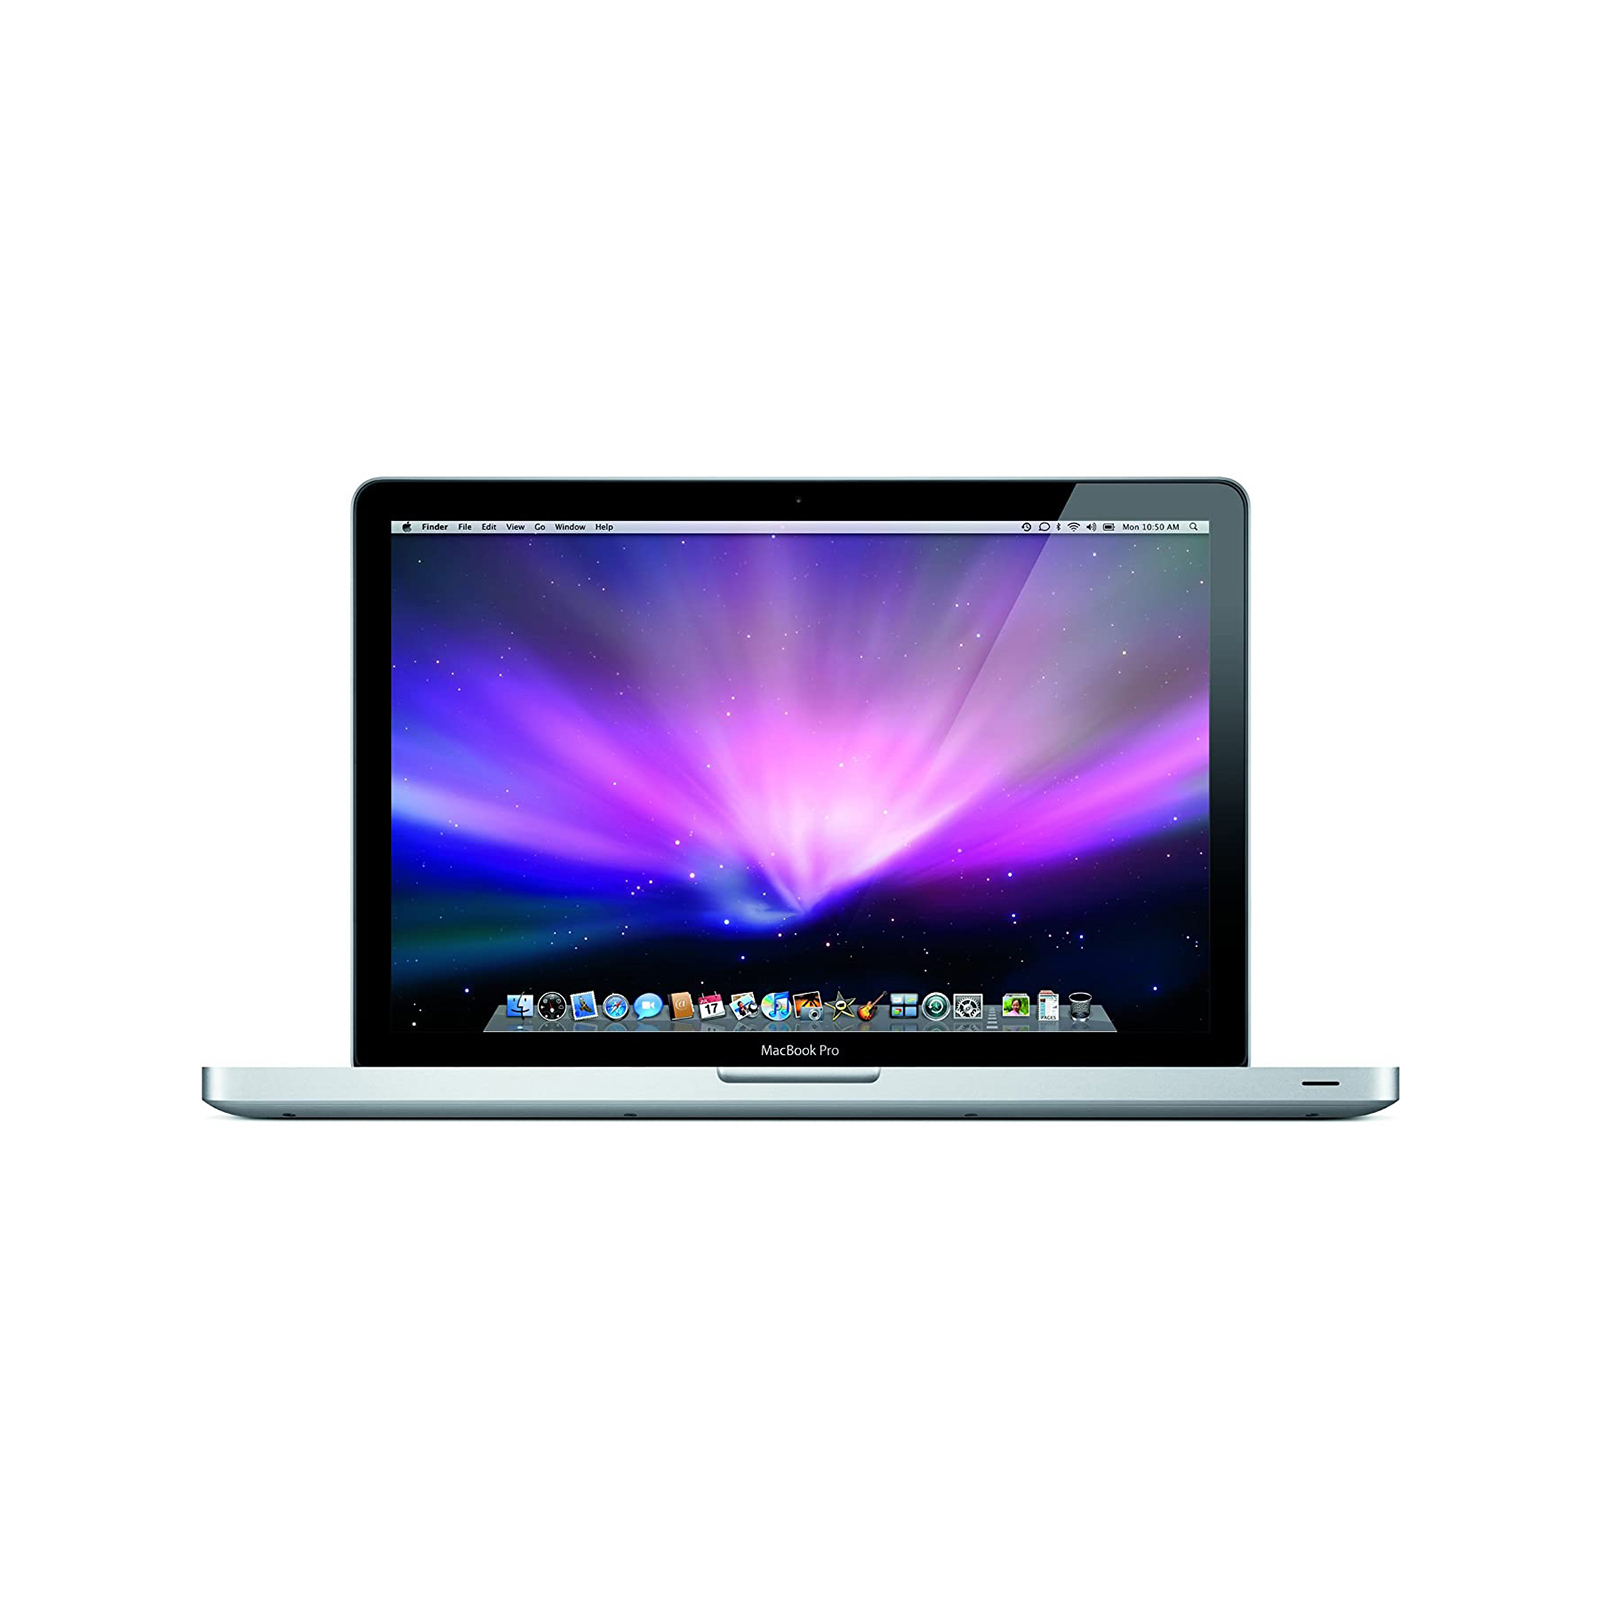 Apple MB986LL/A 15.4" MacBook Pro with Core 2 Duo Processor